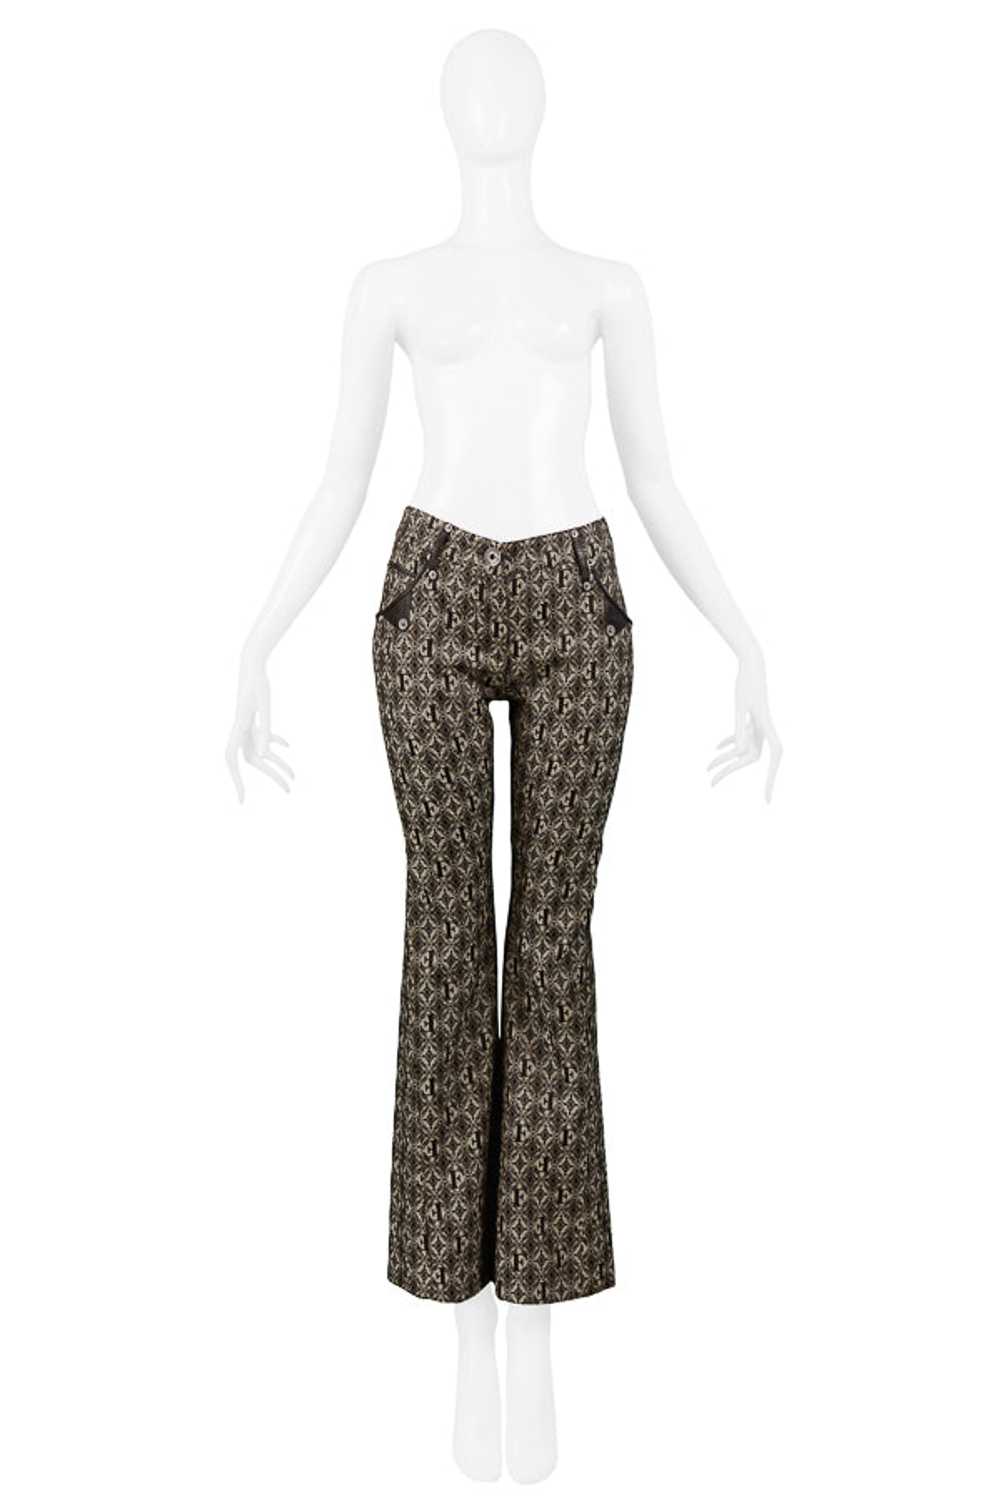 GIANFRANCO FERRE BROWN LOGO PANTS WITH LEATHER TRIM 2… - Gem